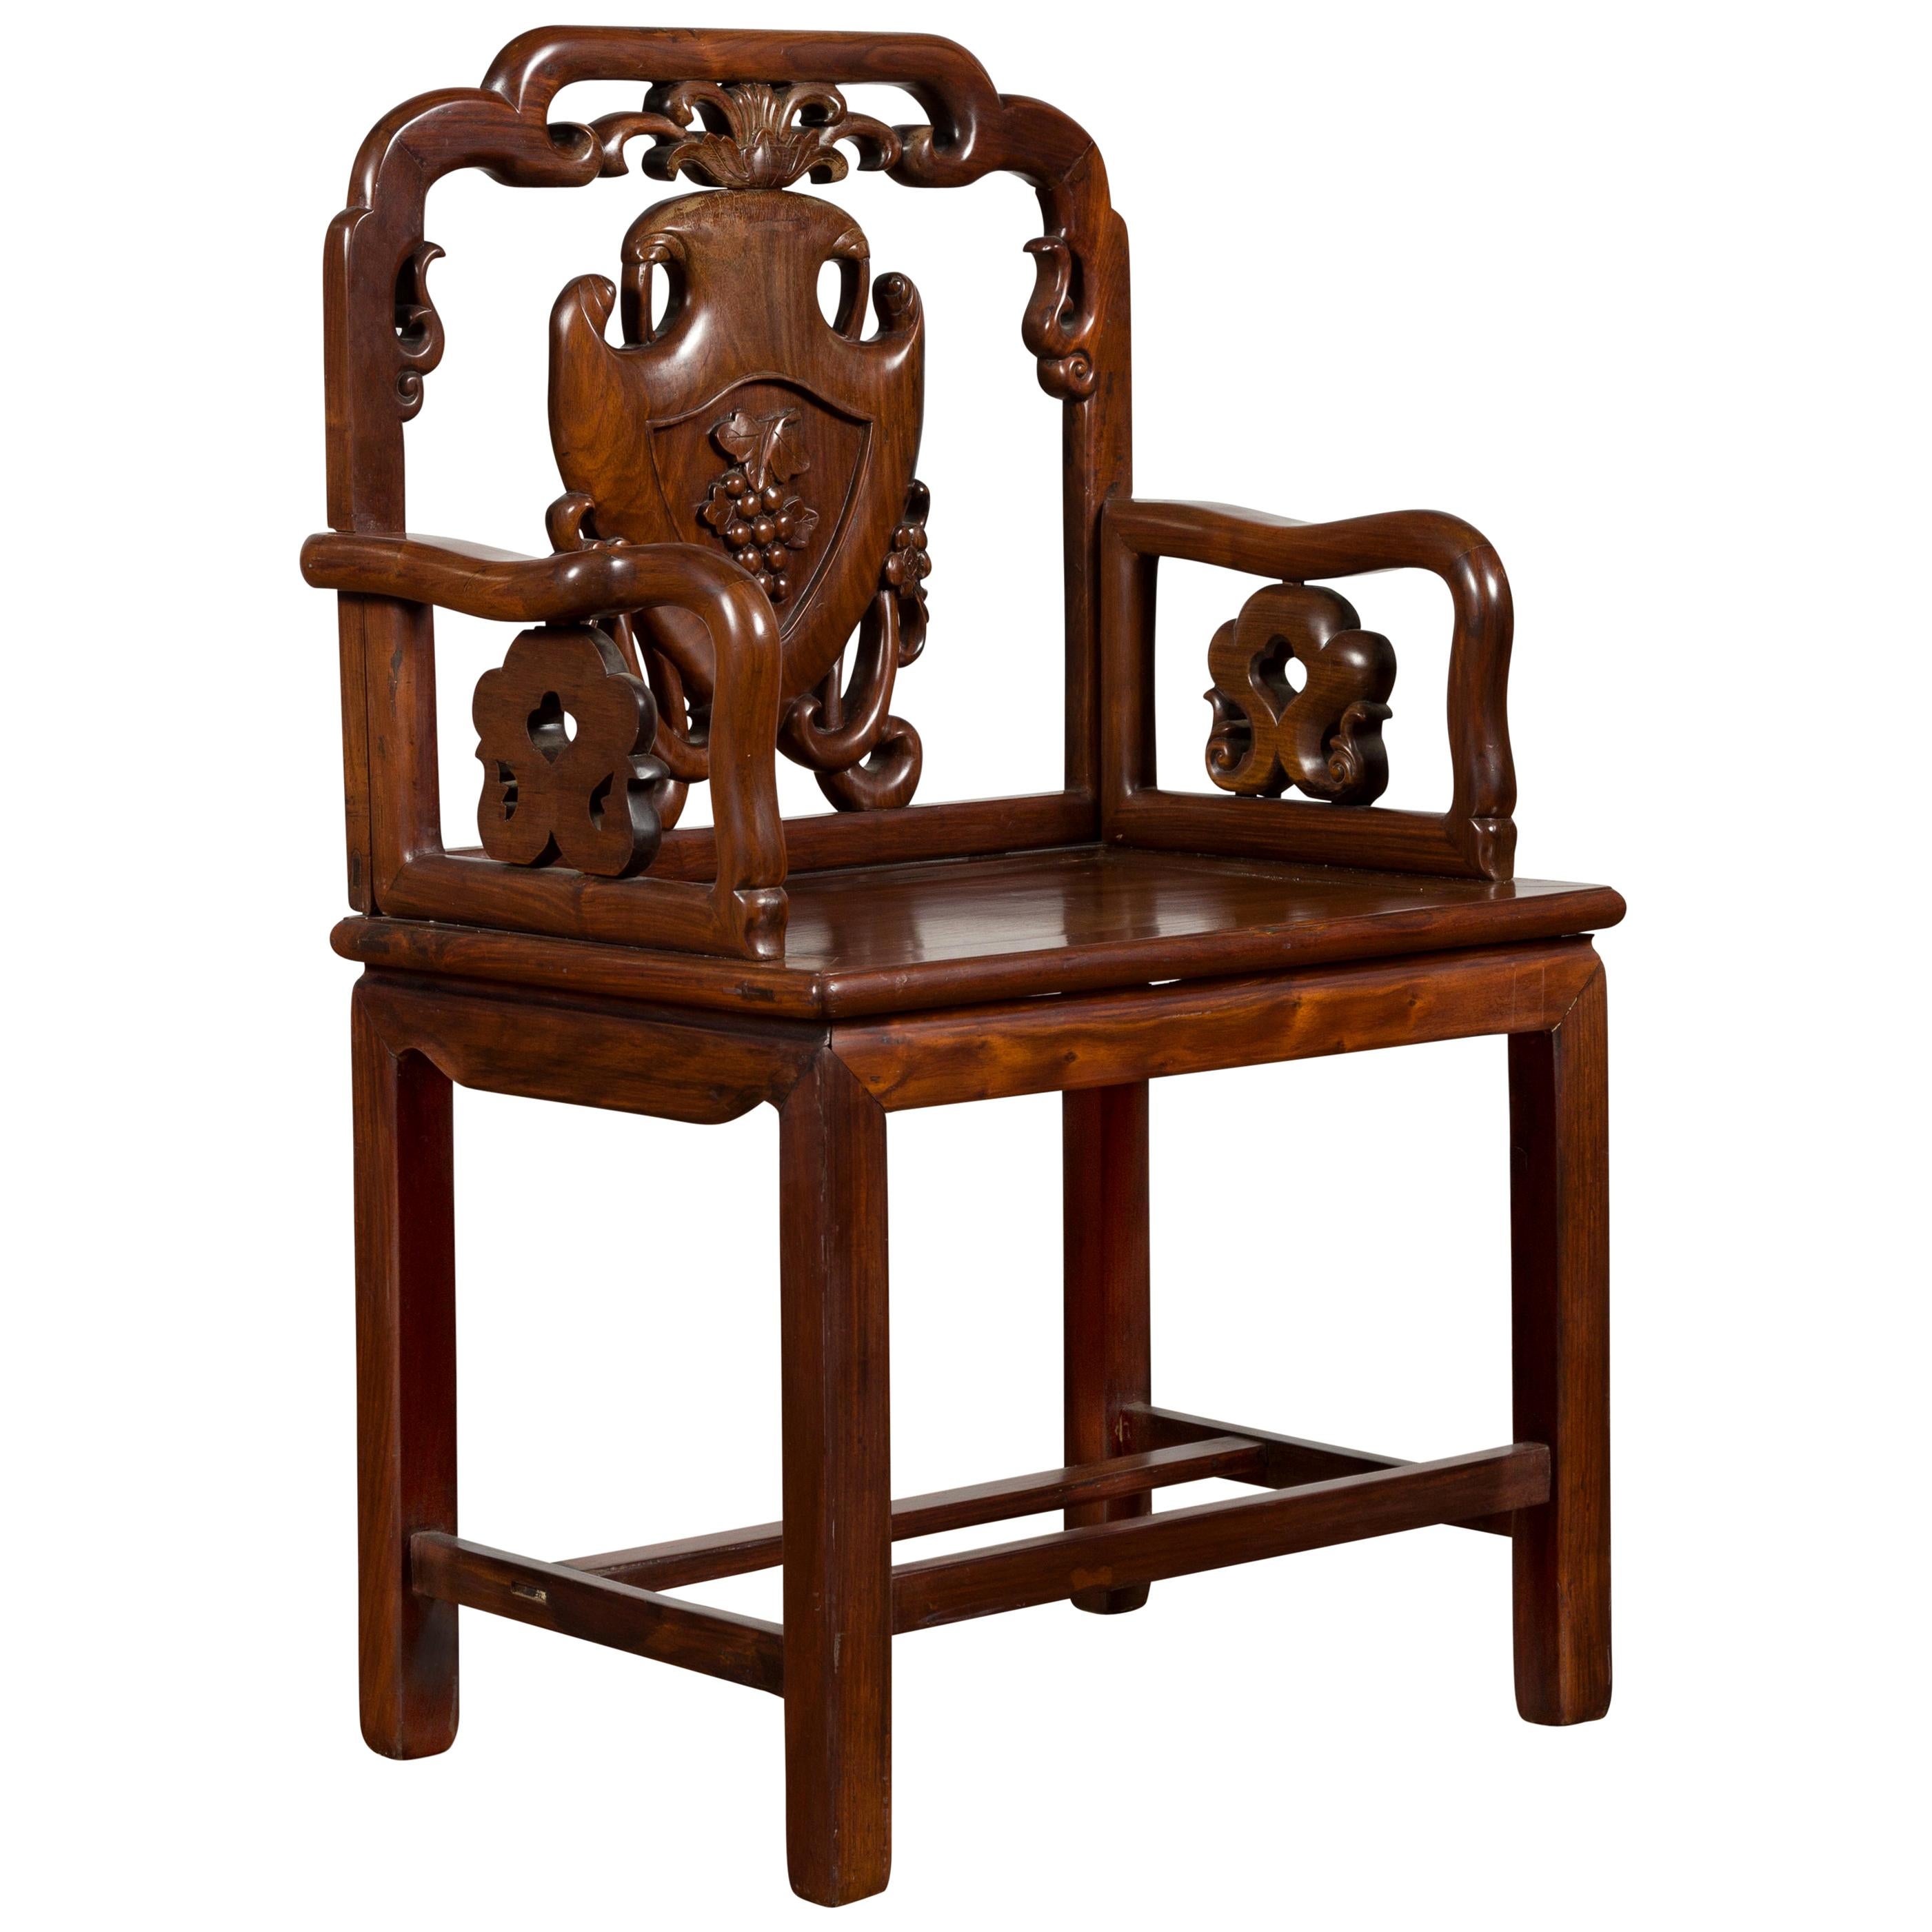 Chinese Qing Dynasty Rosewood Armchair with Carved Splat and Arm Supports